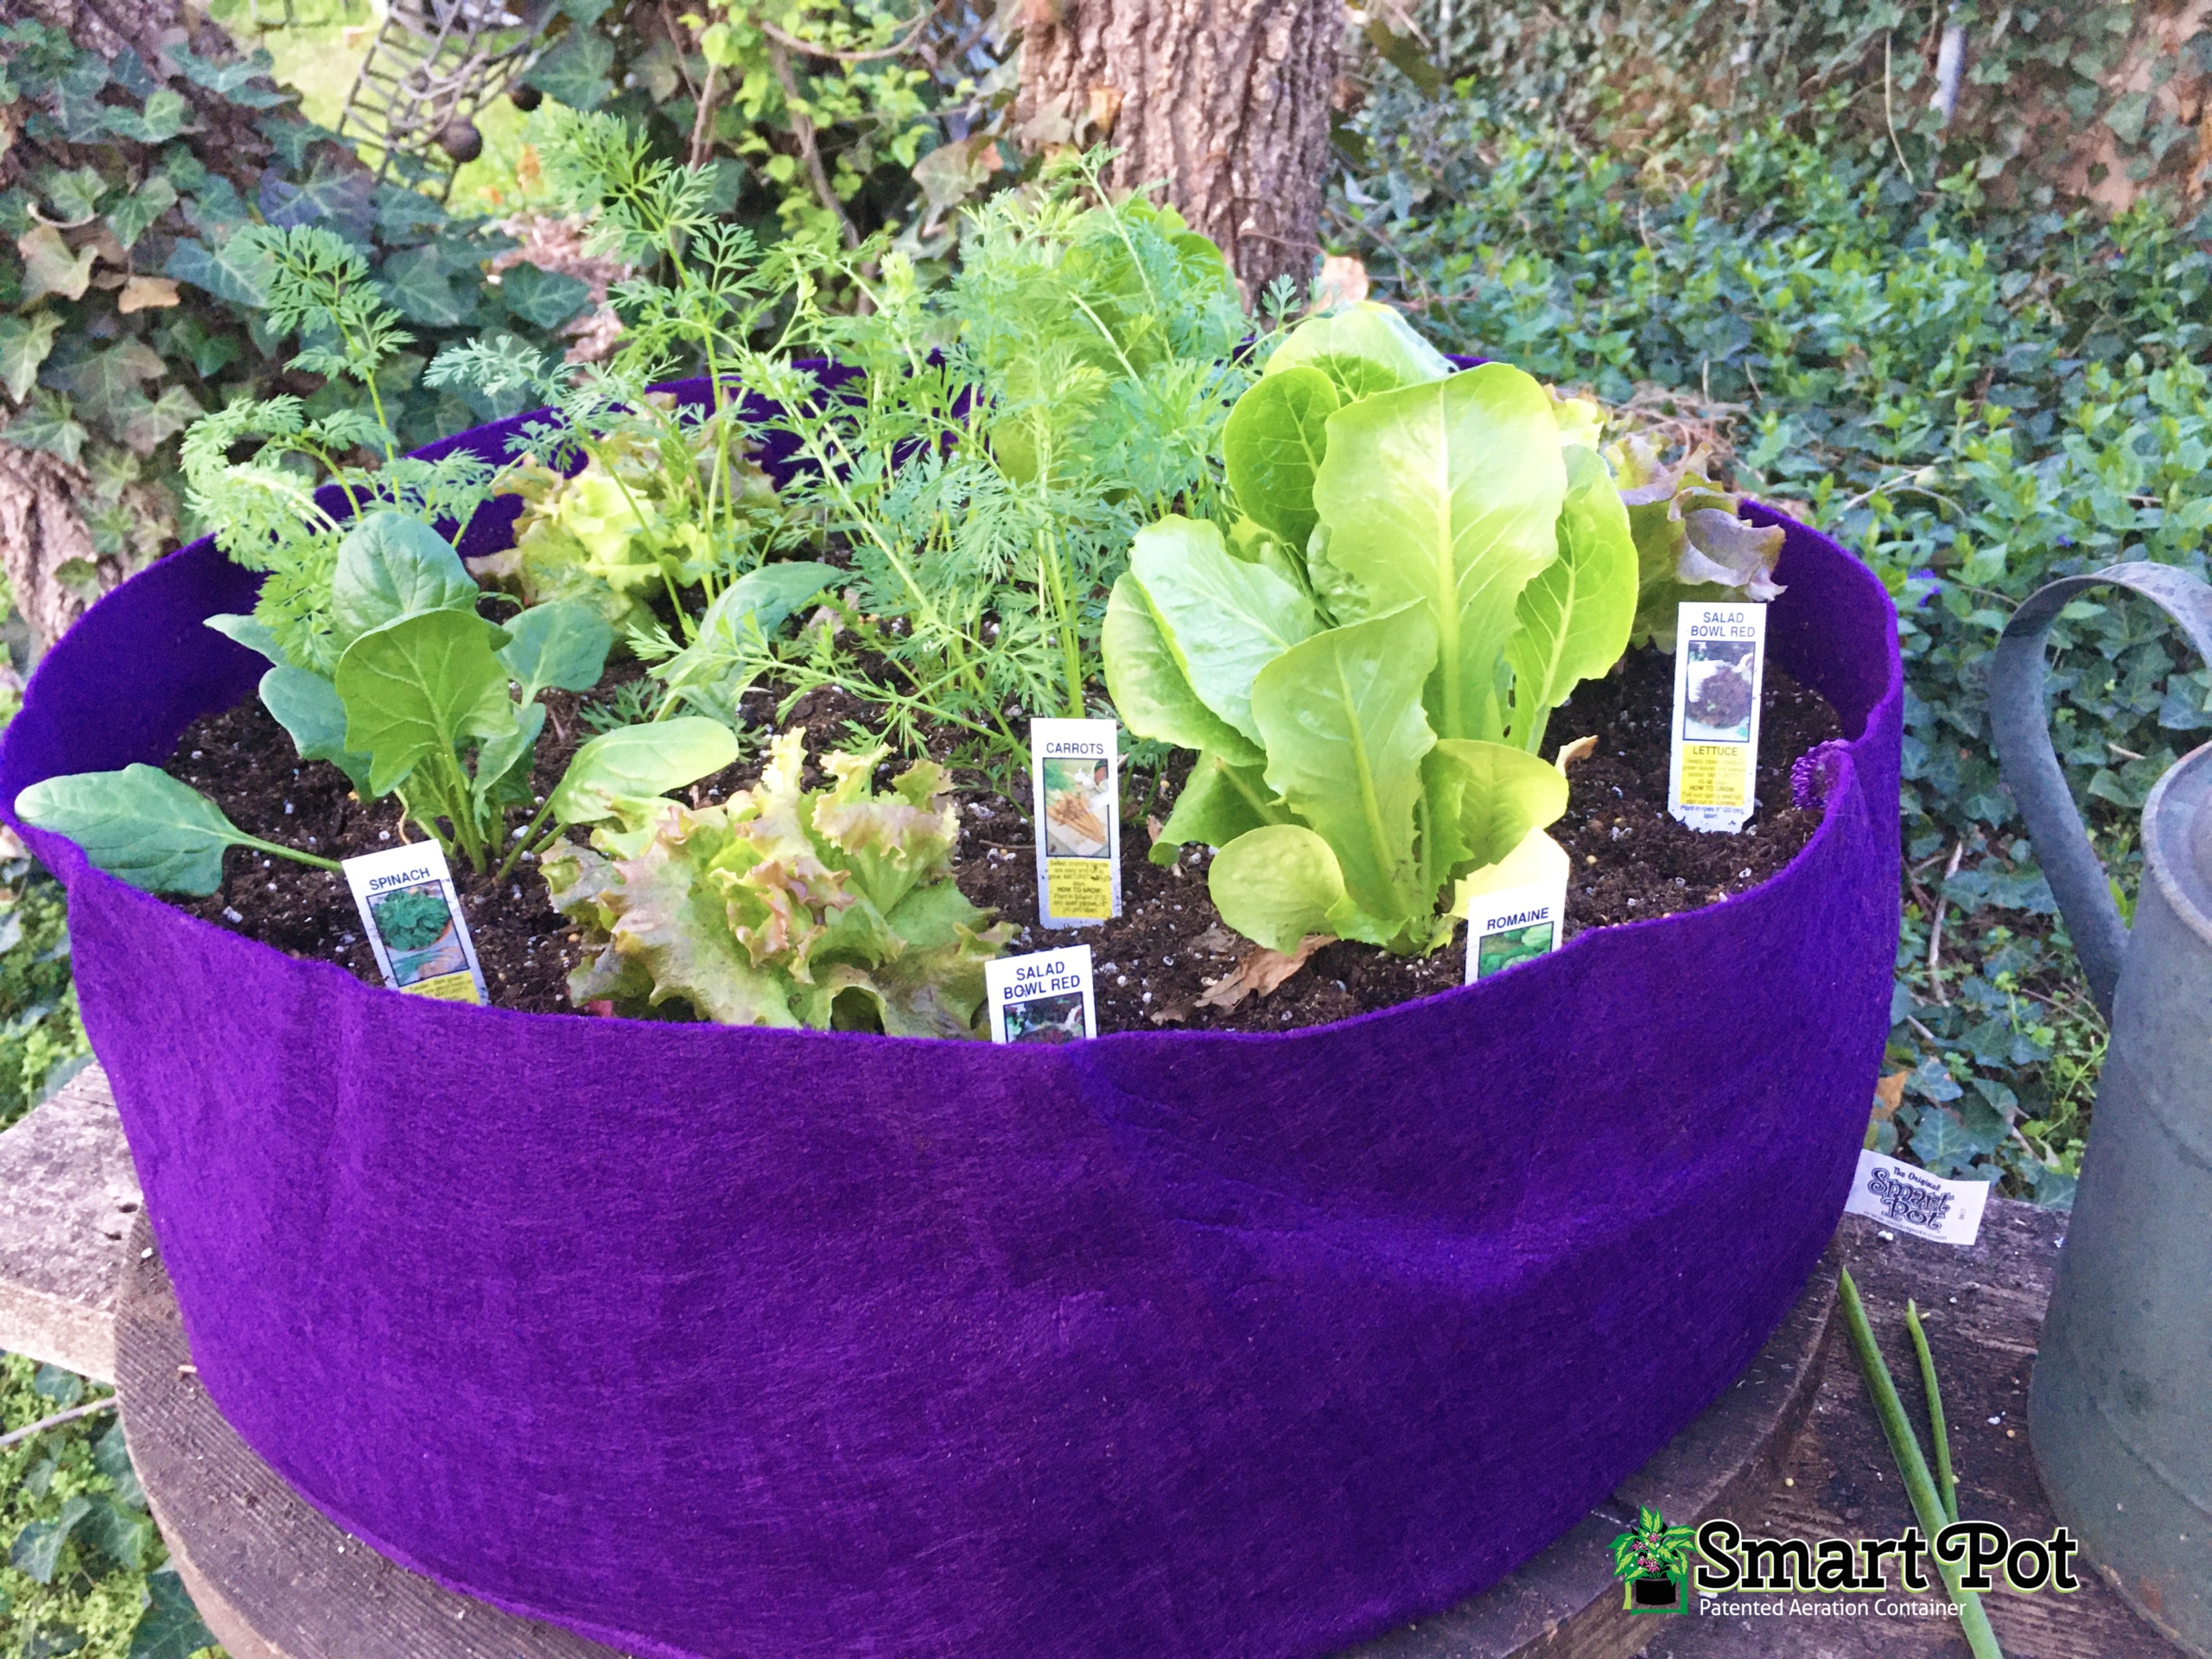 Grow Salads All Year Long with Our Salad Bar Gardening Tutorial